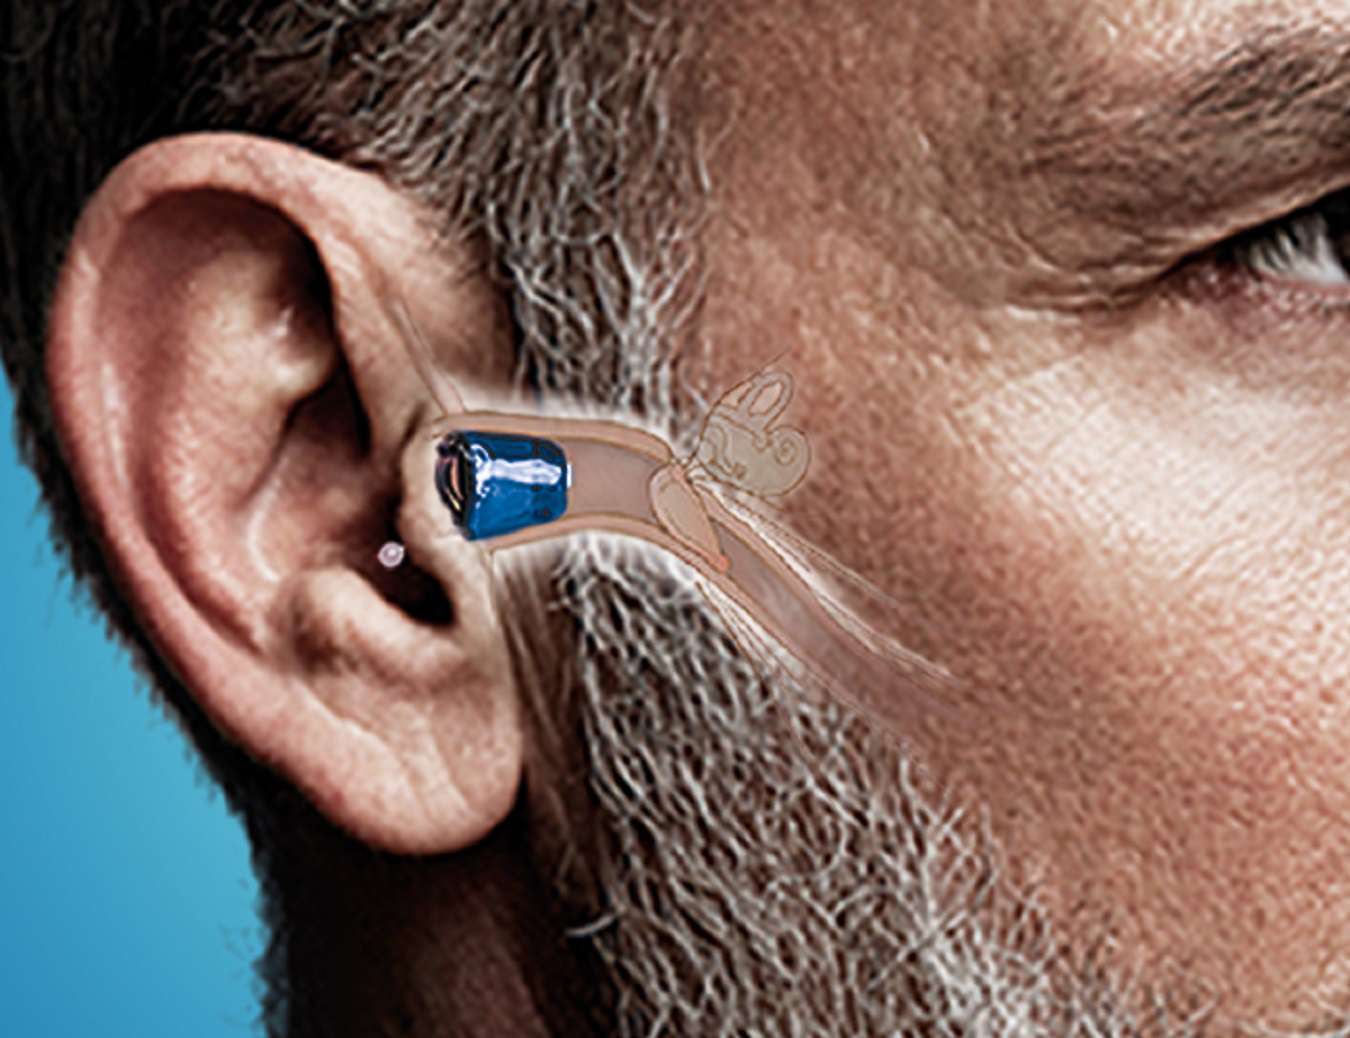 Taboola Ad Example 53499 - Wanted: Canadians Over 50 To Try Out Hearing Aid For Free!